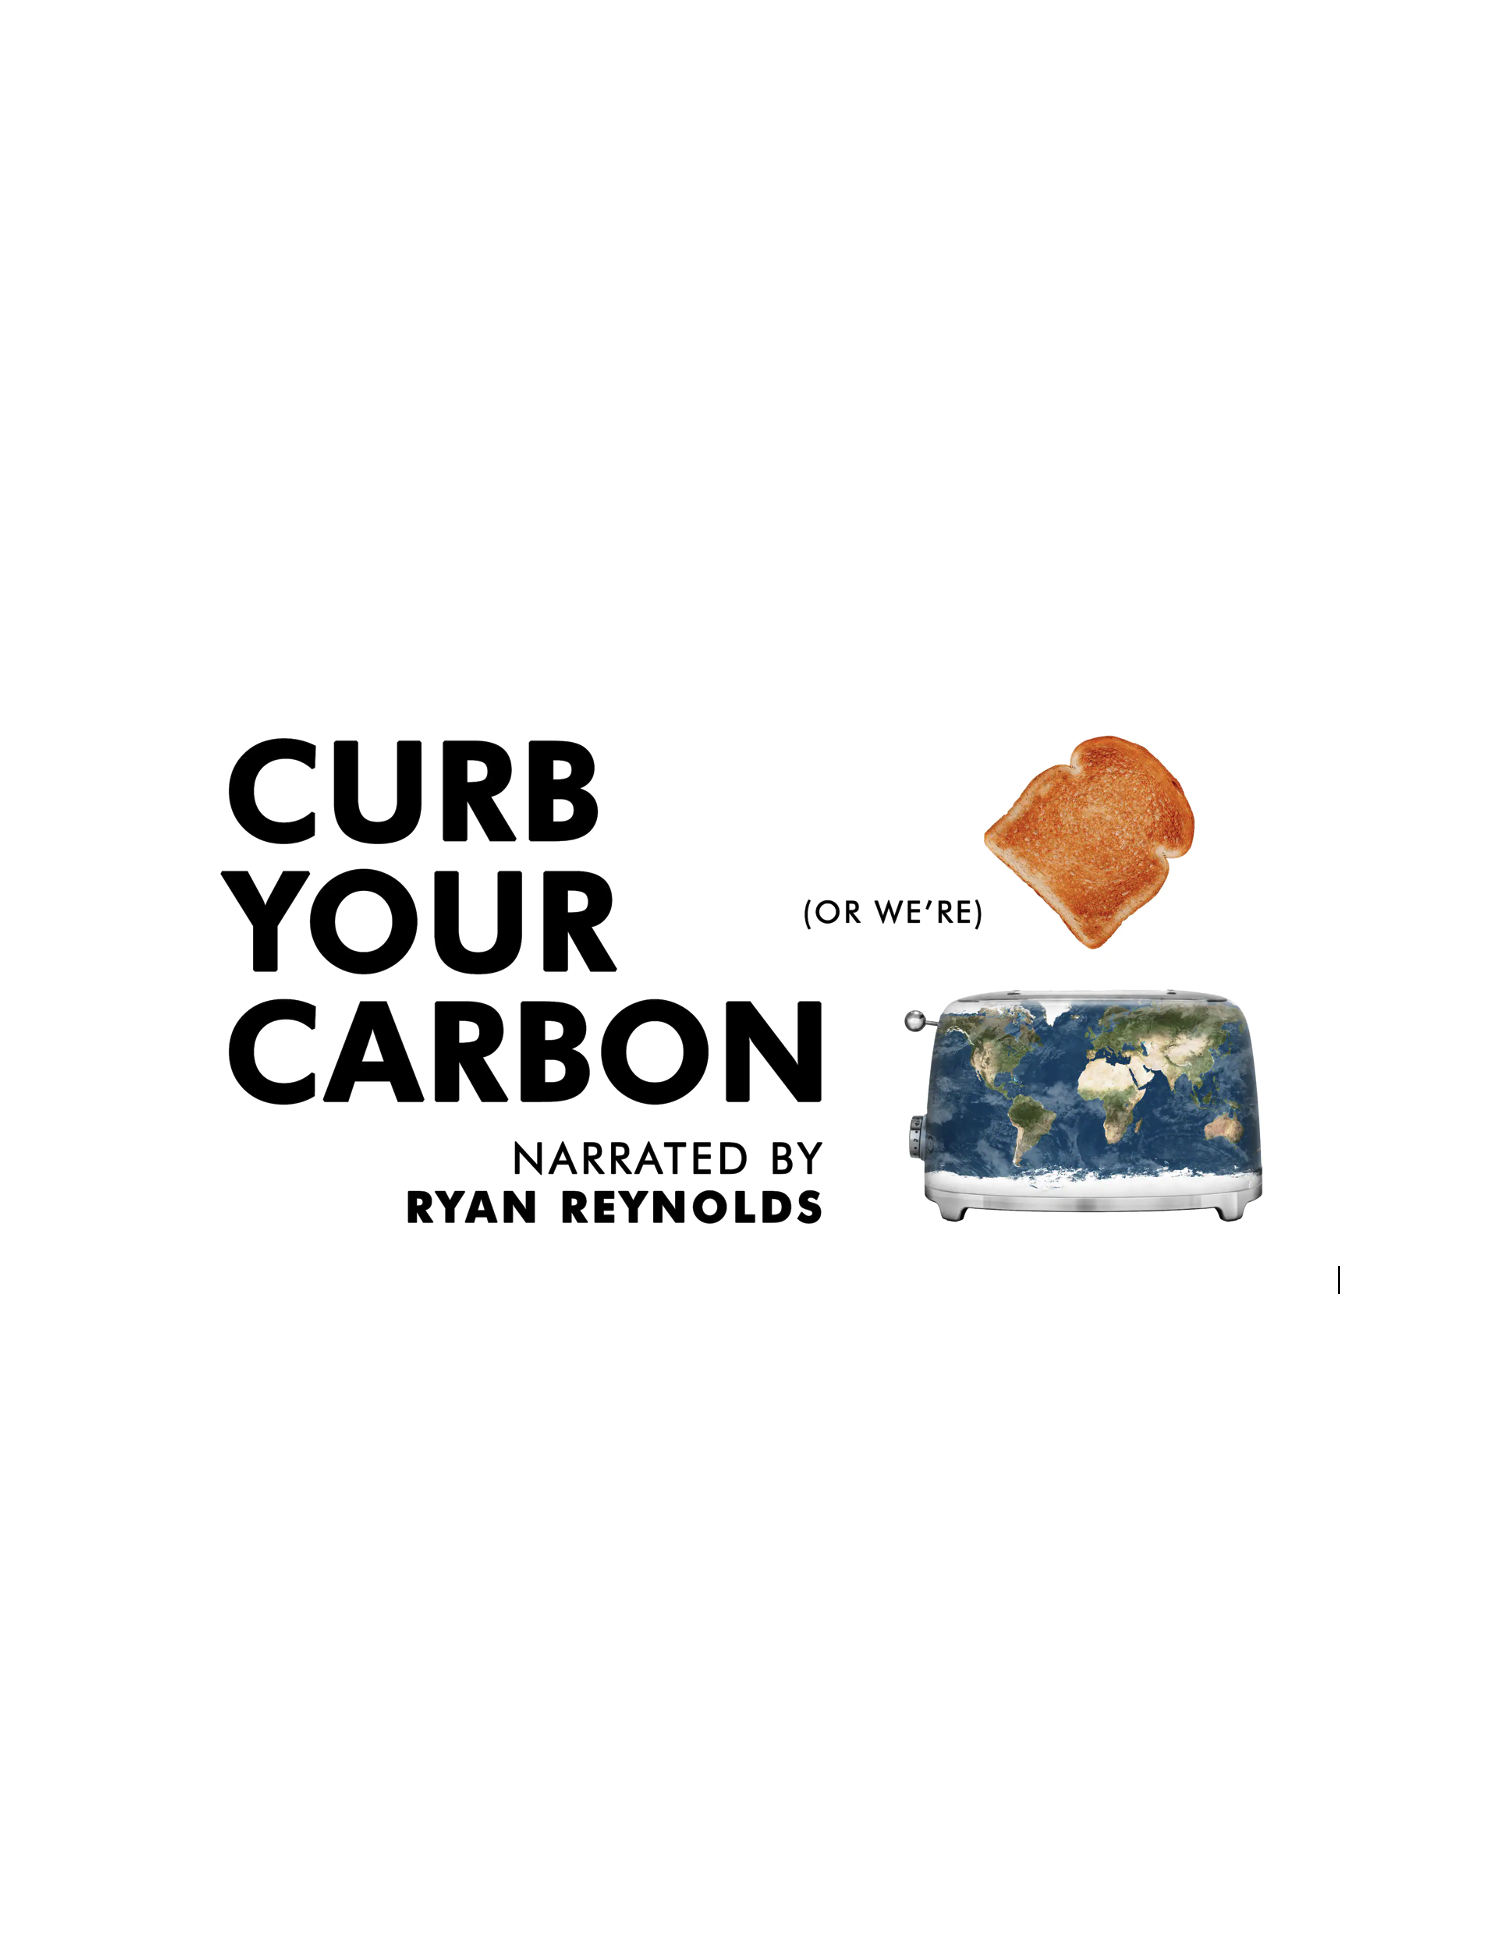 'Curb Your Carbon, Narrated by Ryan Reynolds, On CBC' core news picture